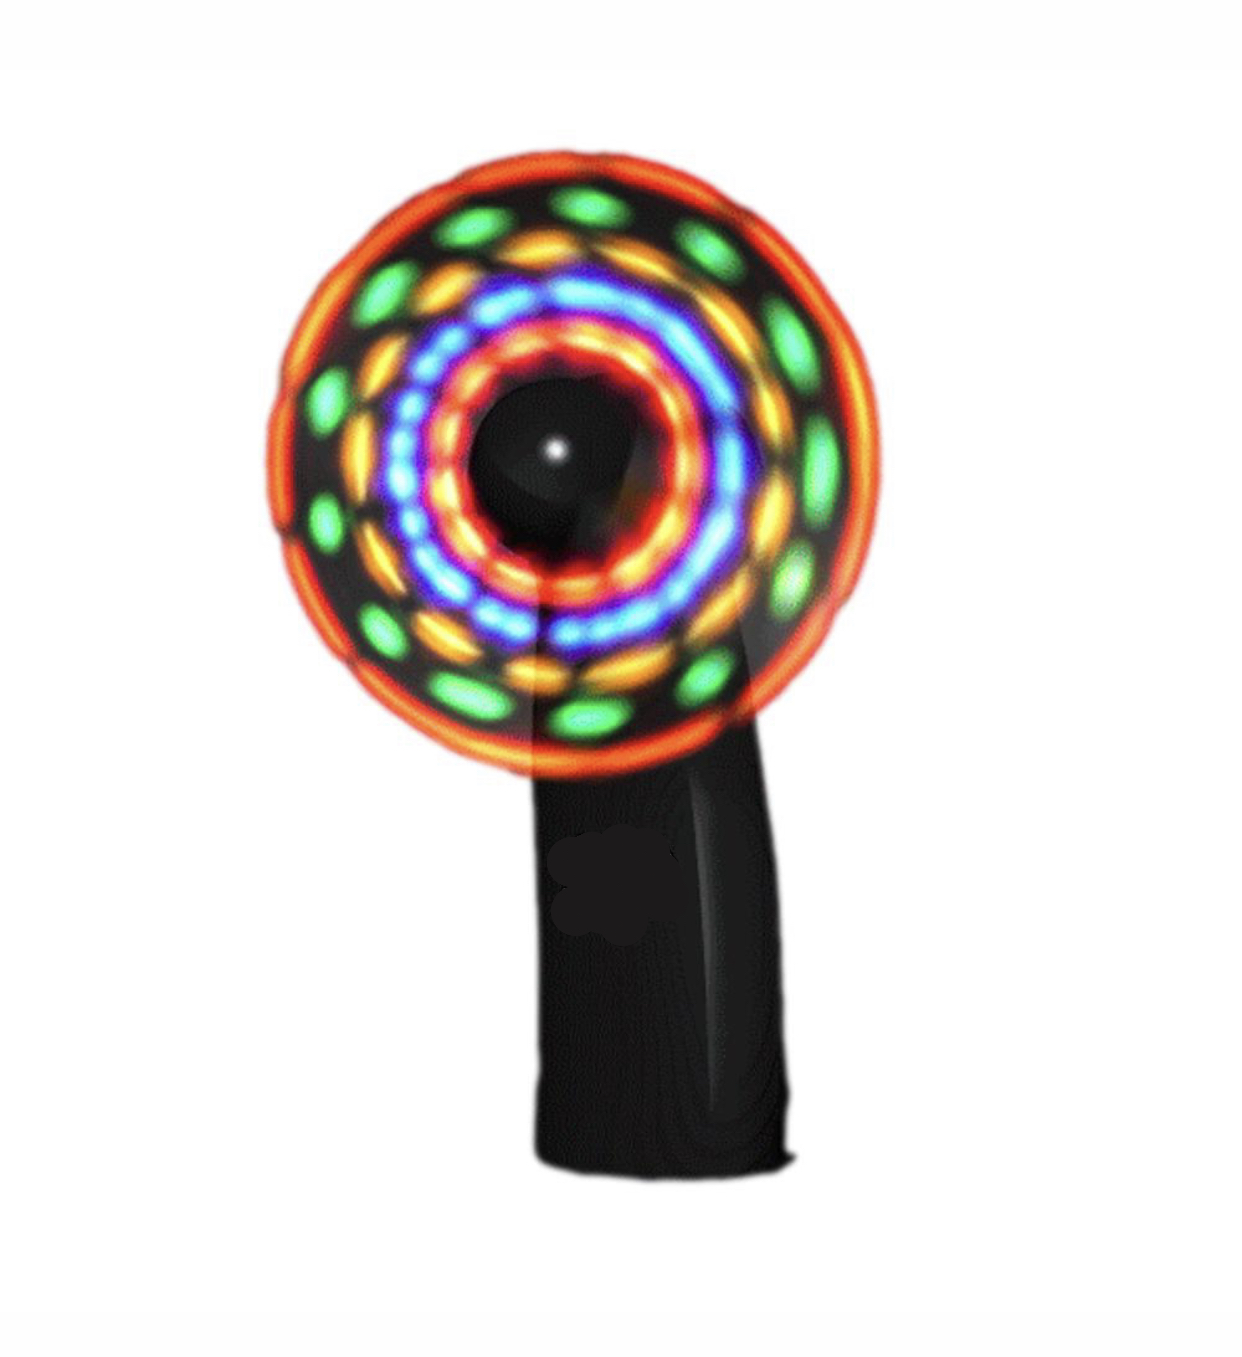 Portable Light Up Mini Cooling FAN with Black Handle Battery Operated for Hot Weather